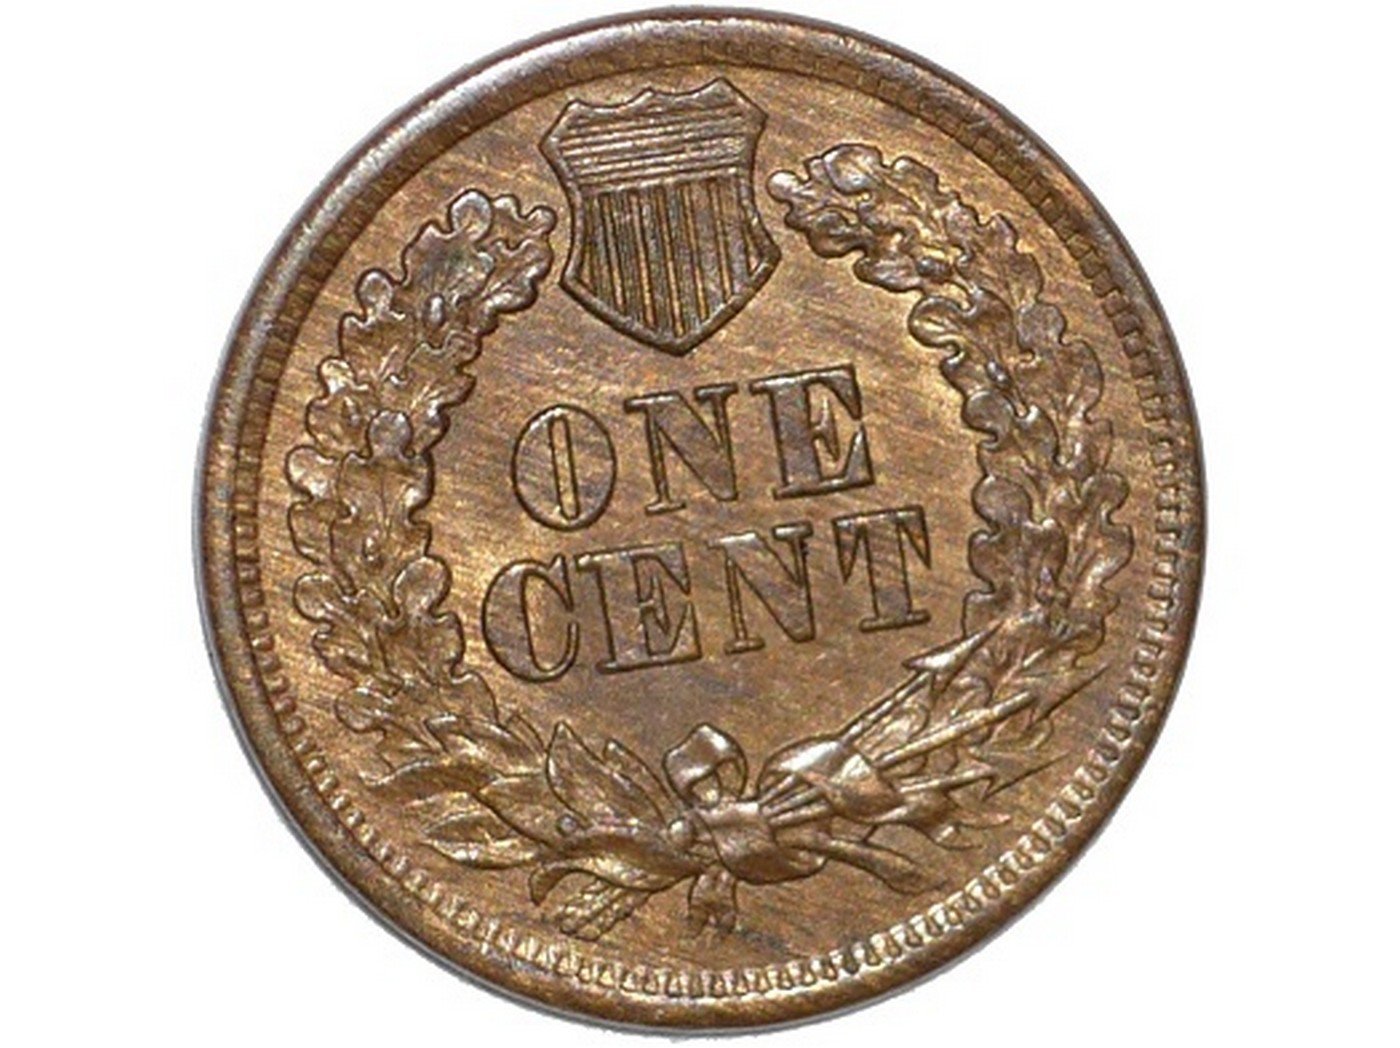 1865 Reverse of Plain 5 RPD-011 - Indian Head Penny - Photo by David Poliquin